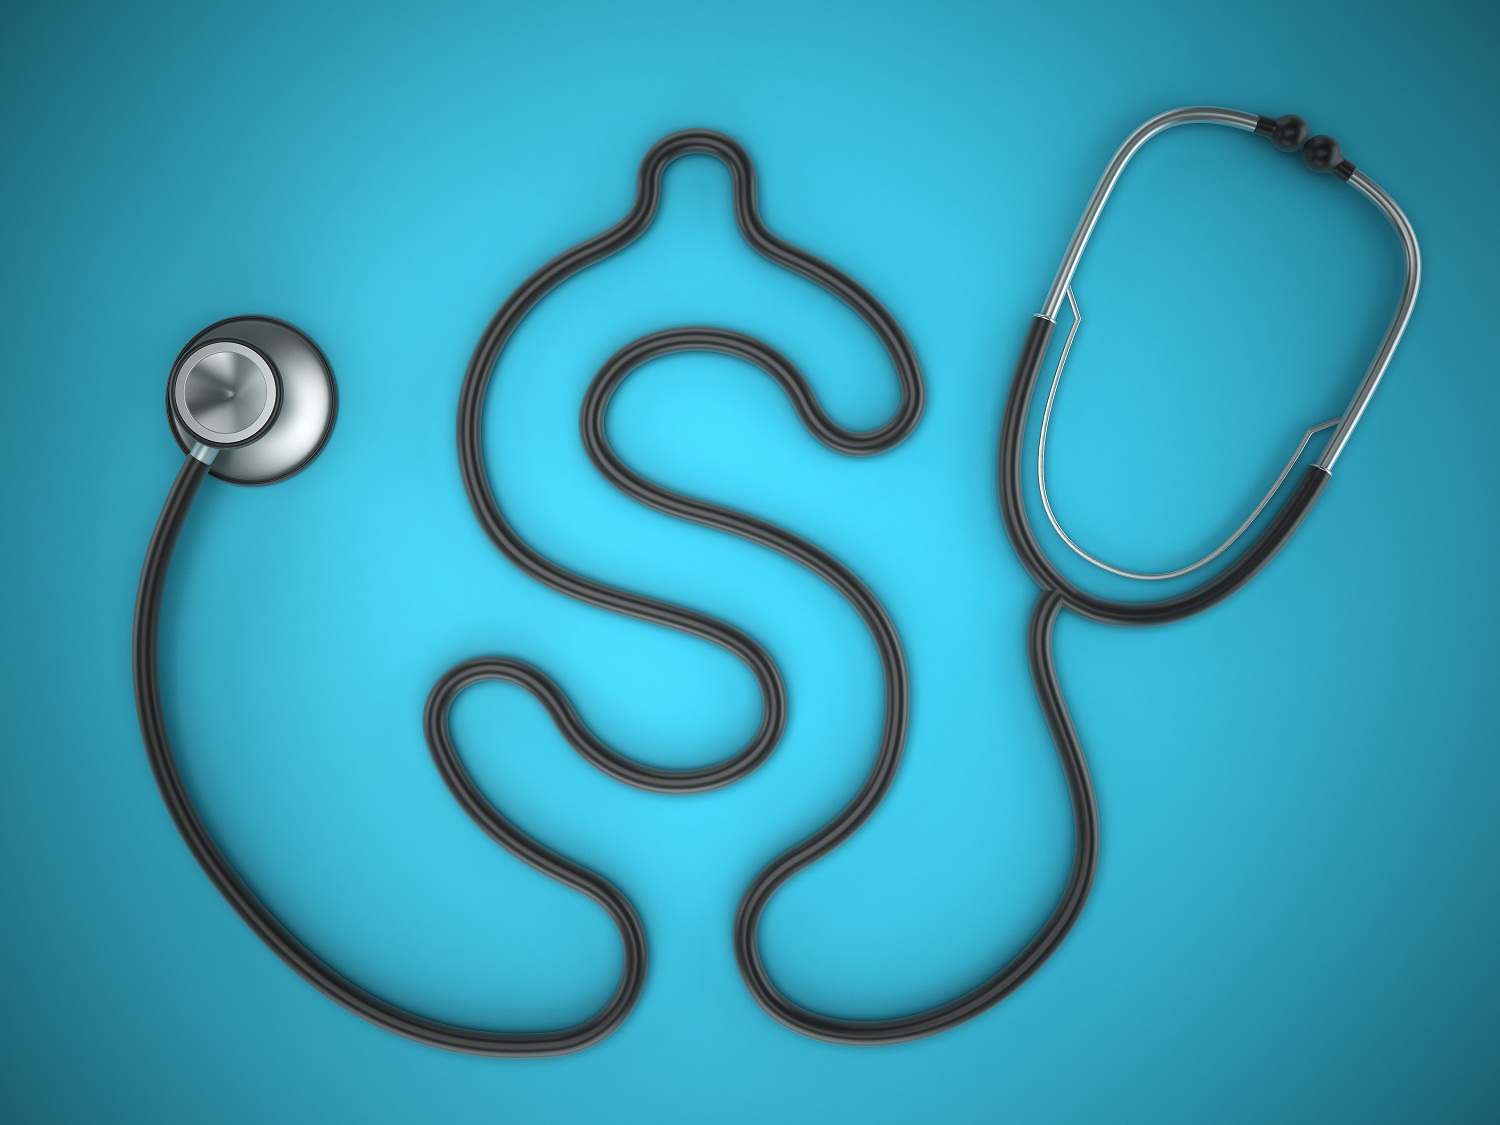 stethoscope in shape of dollar sign